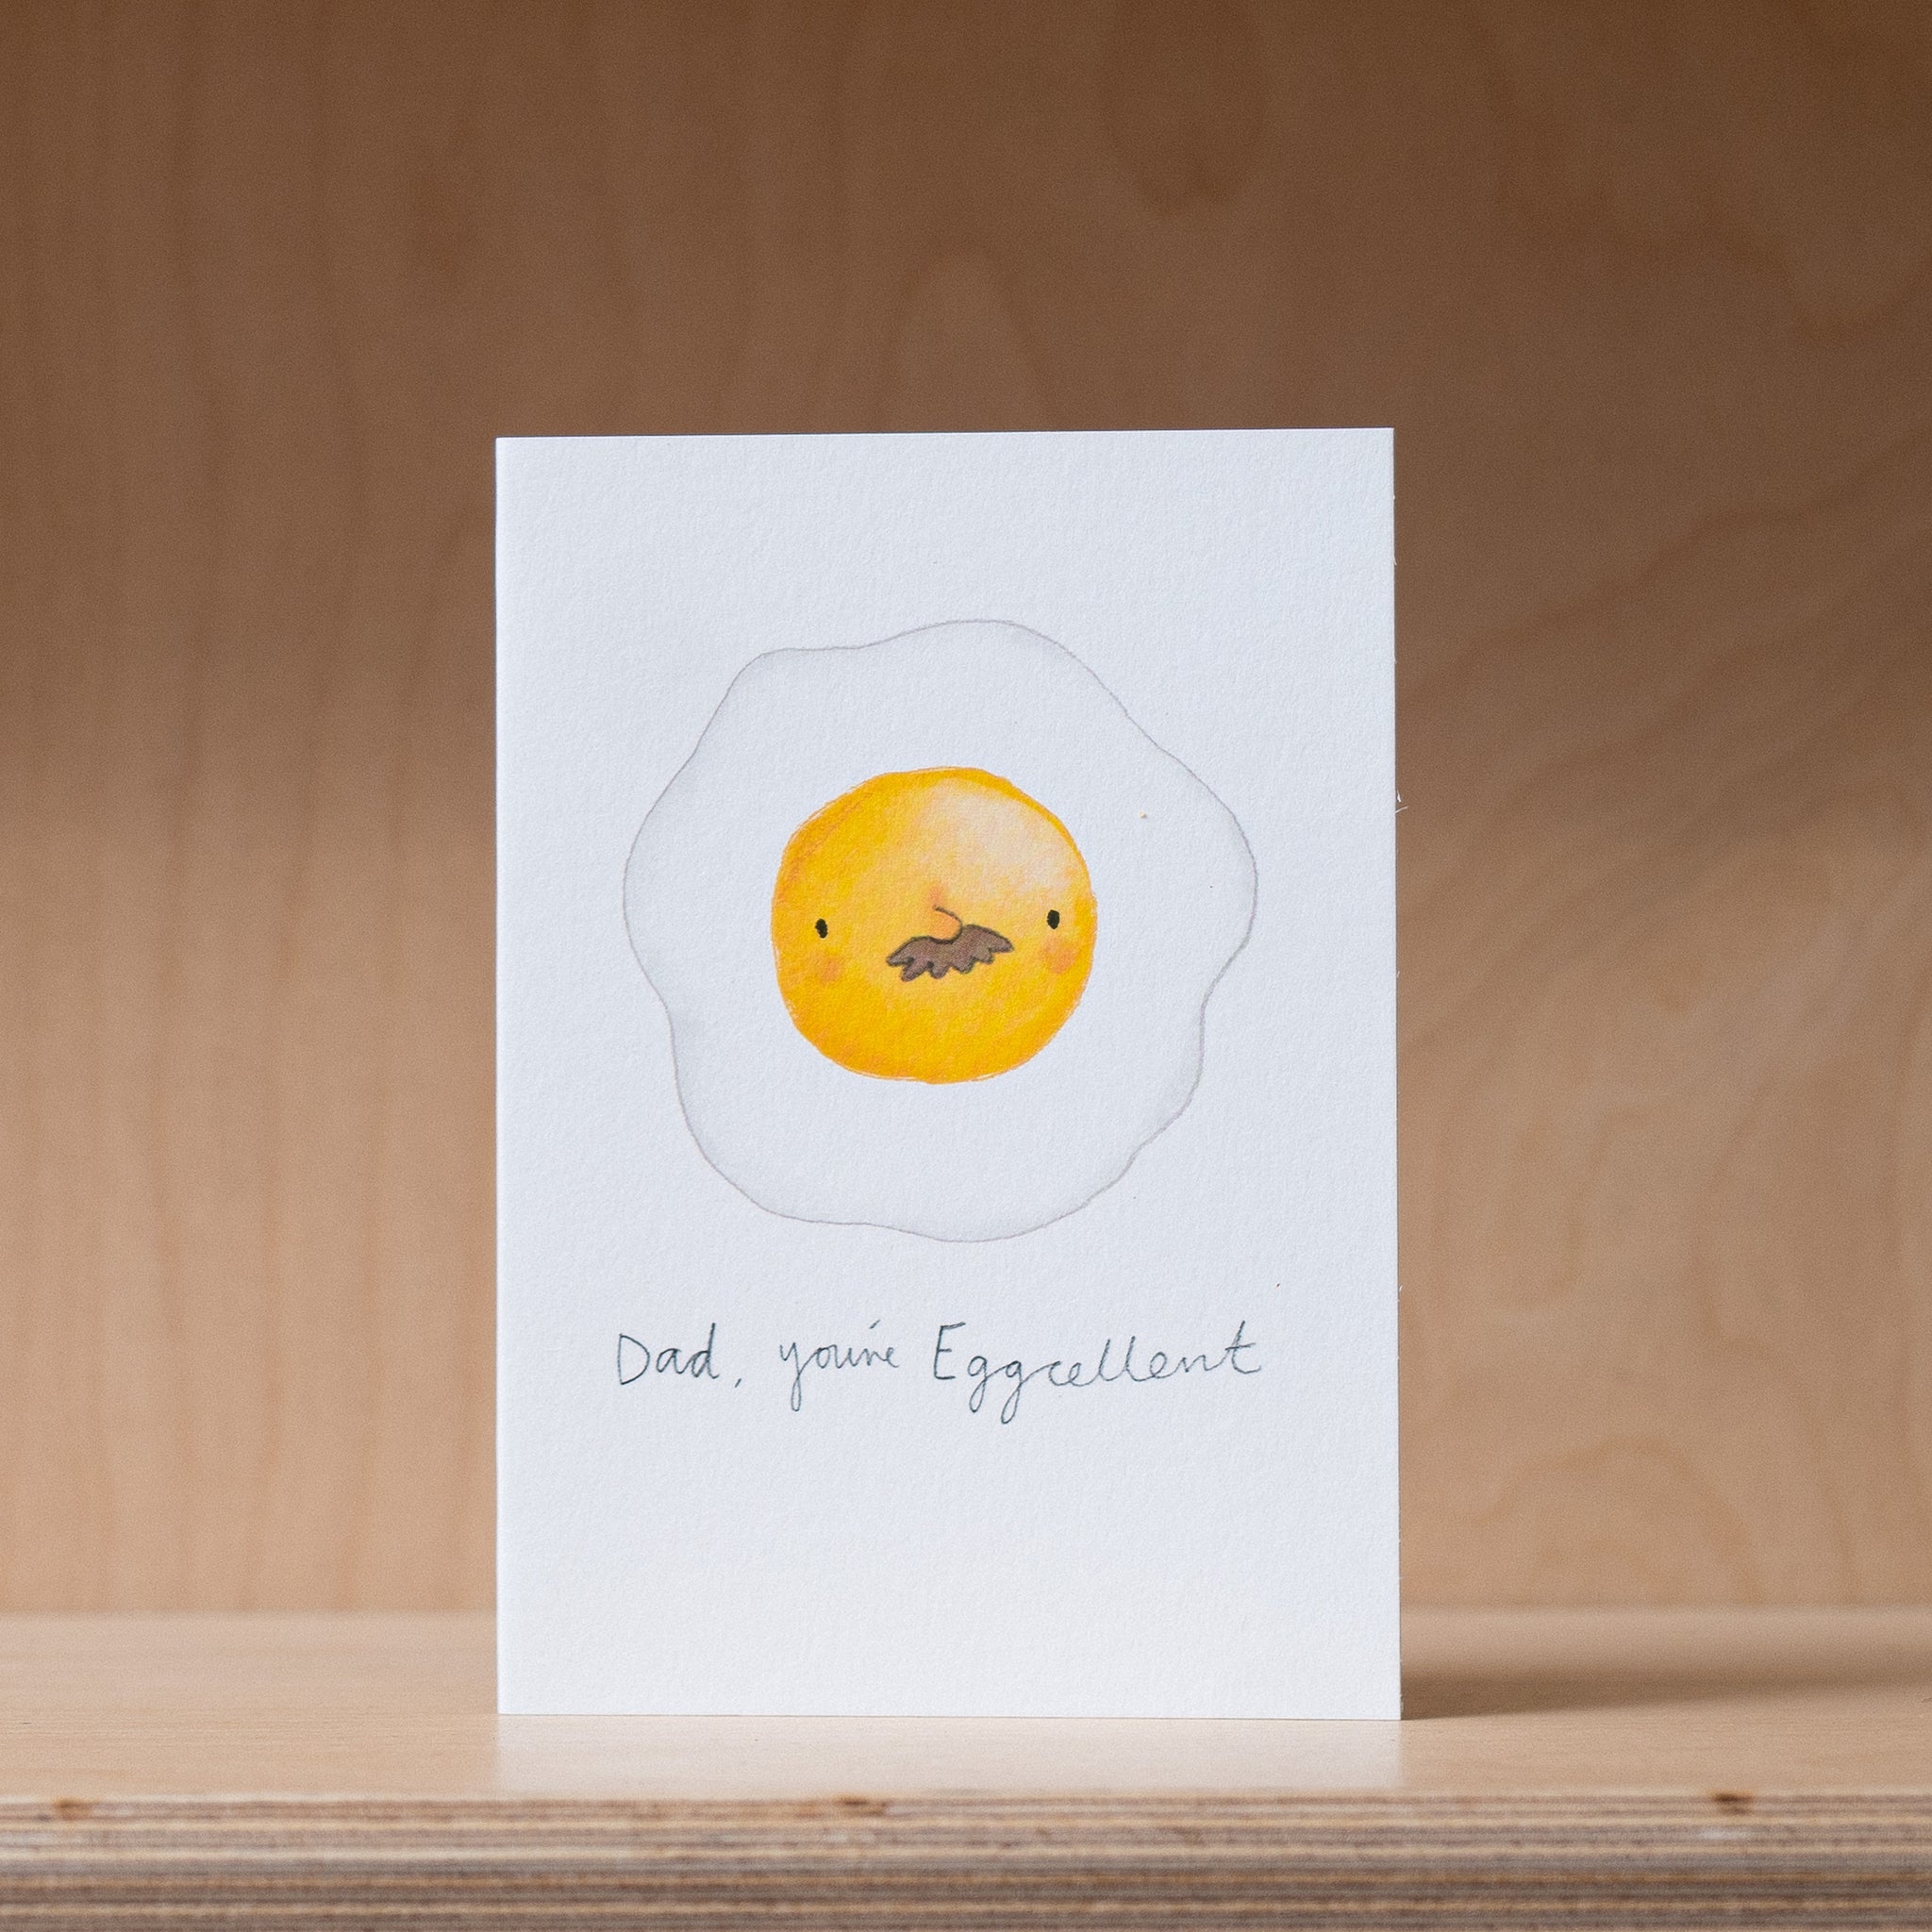 Dad, You're a Eggcellent - Greetings Card